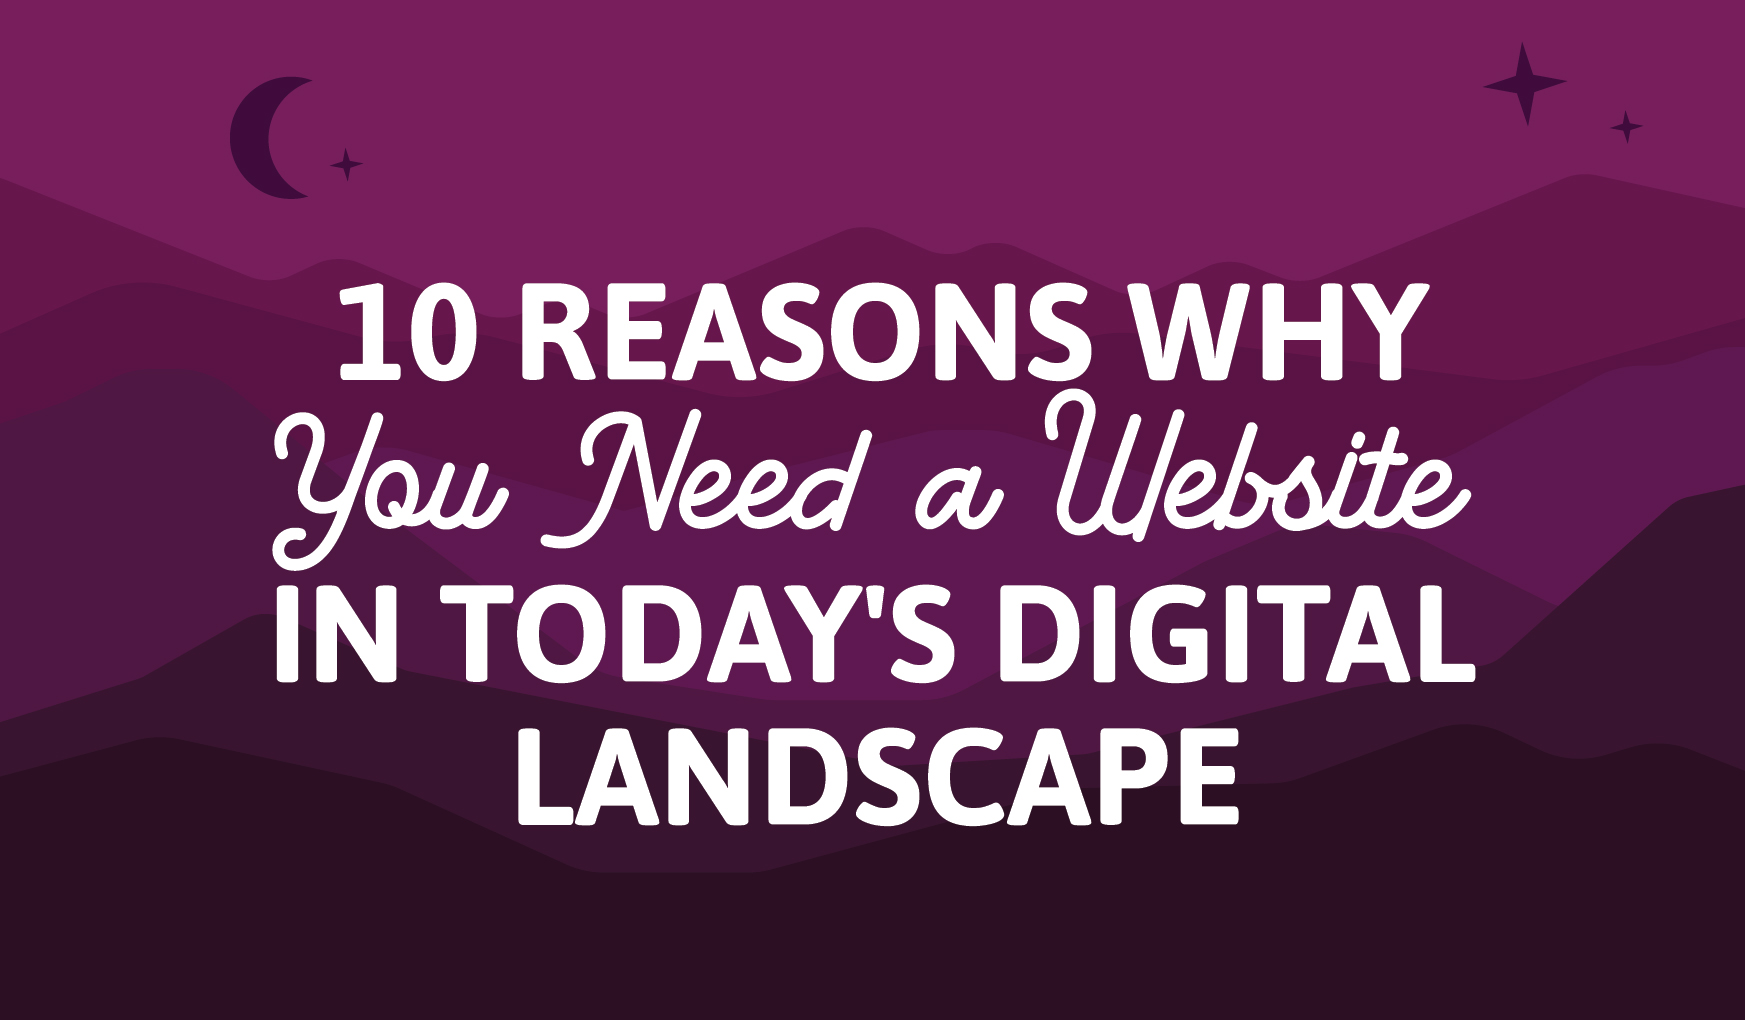 10 reasons why you need a website in today's digital landscape